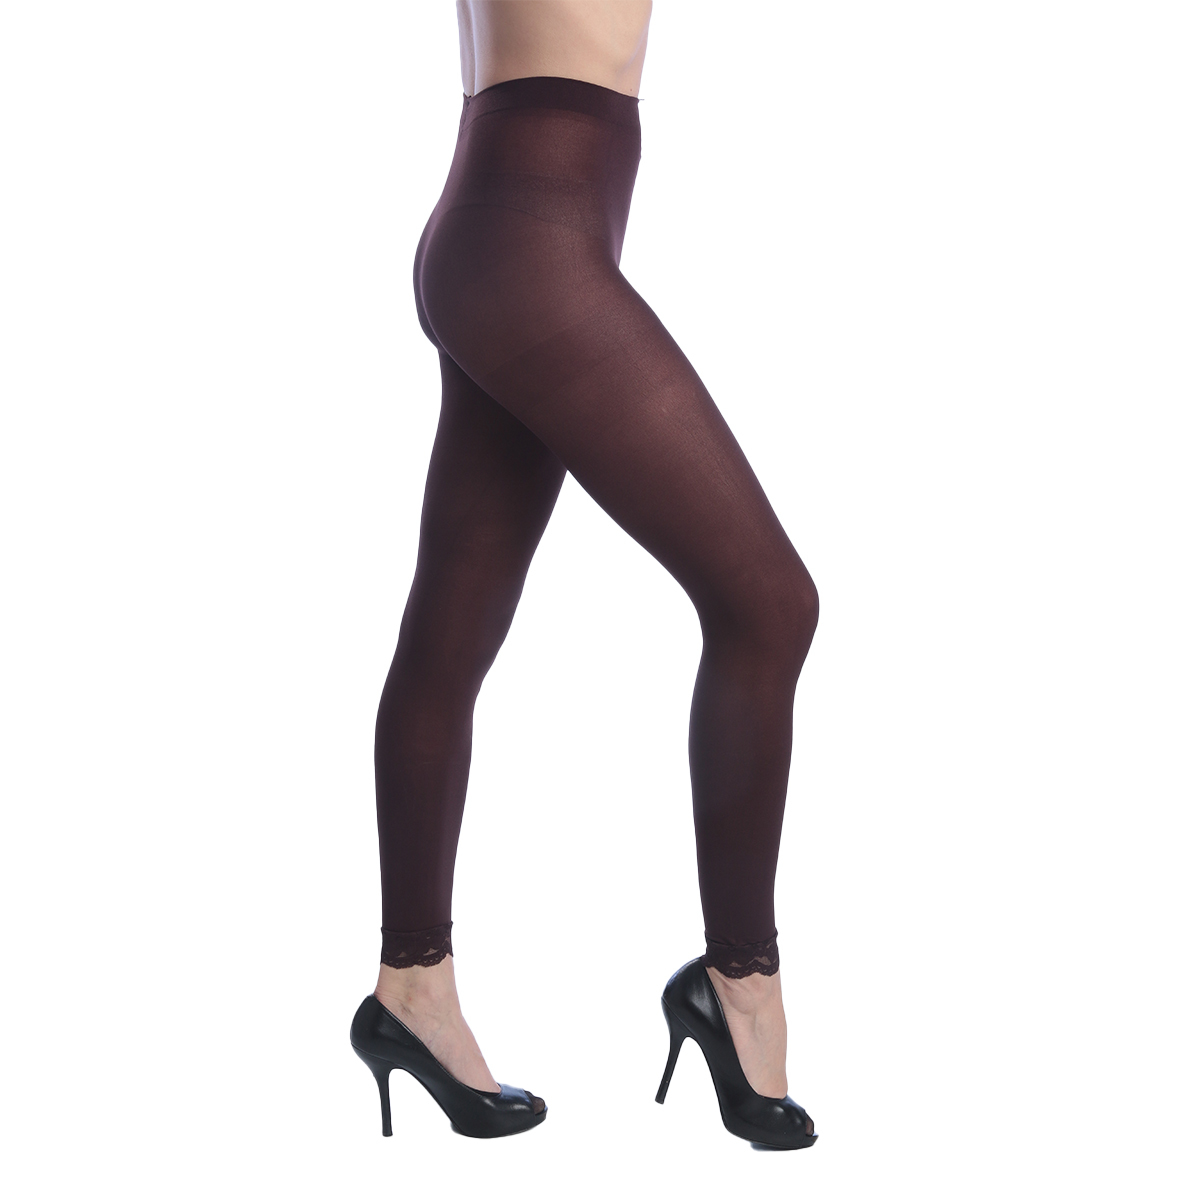 Women's Opaque Control Top Footless Lace Tights - Brown, Queen Size